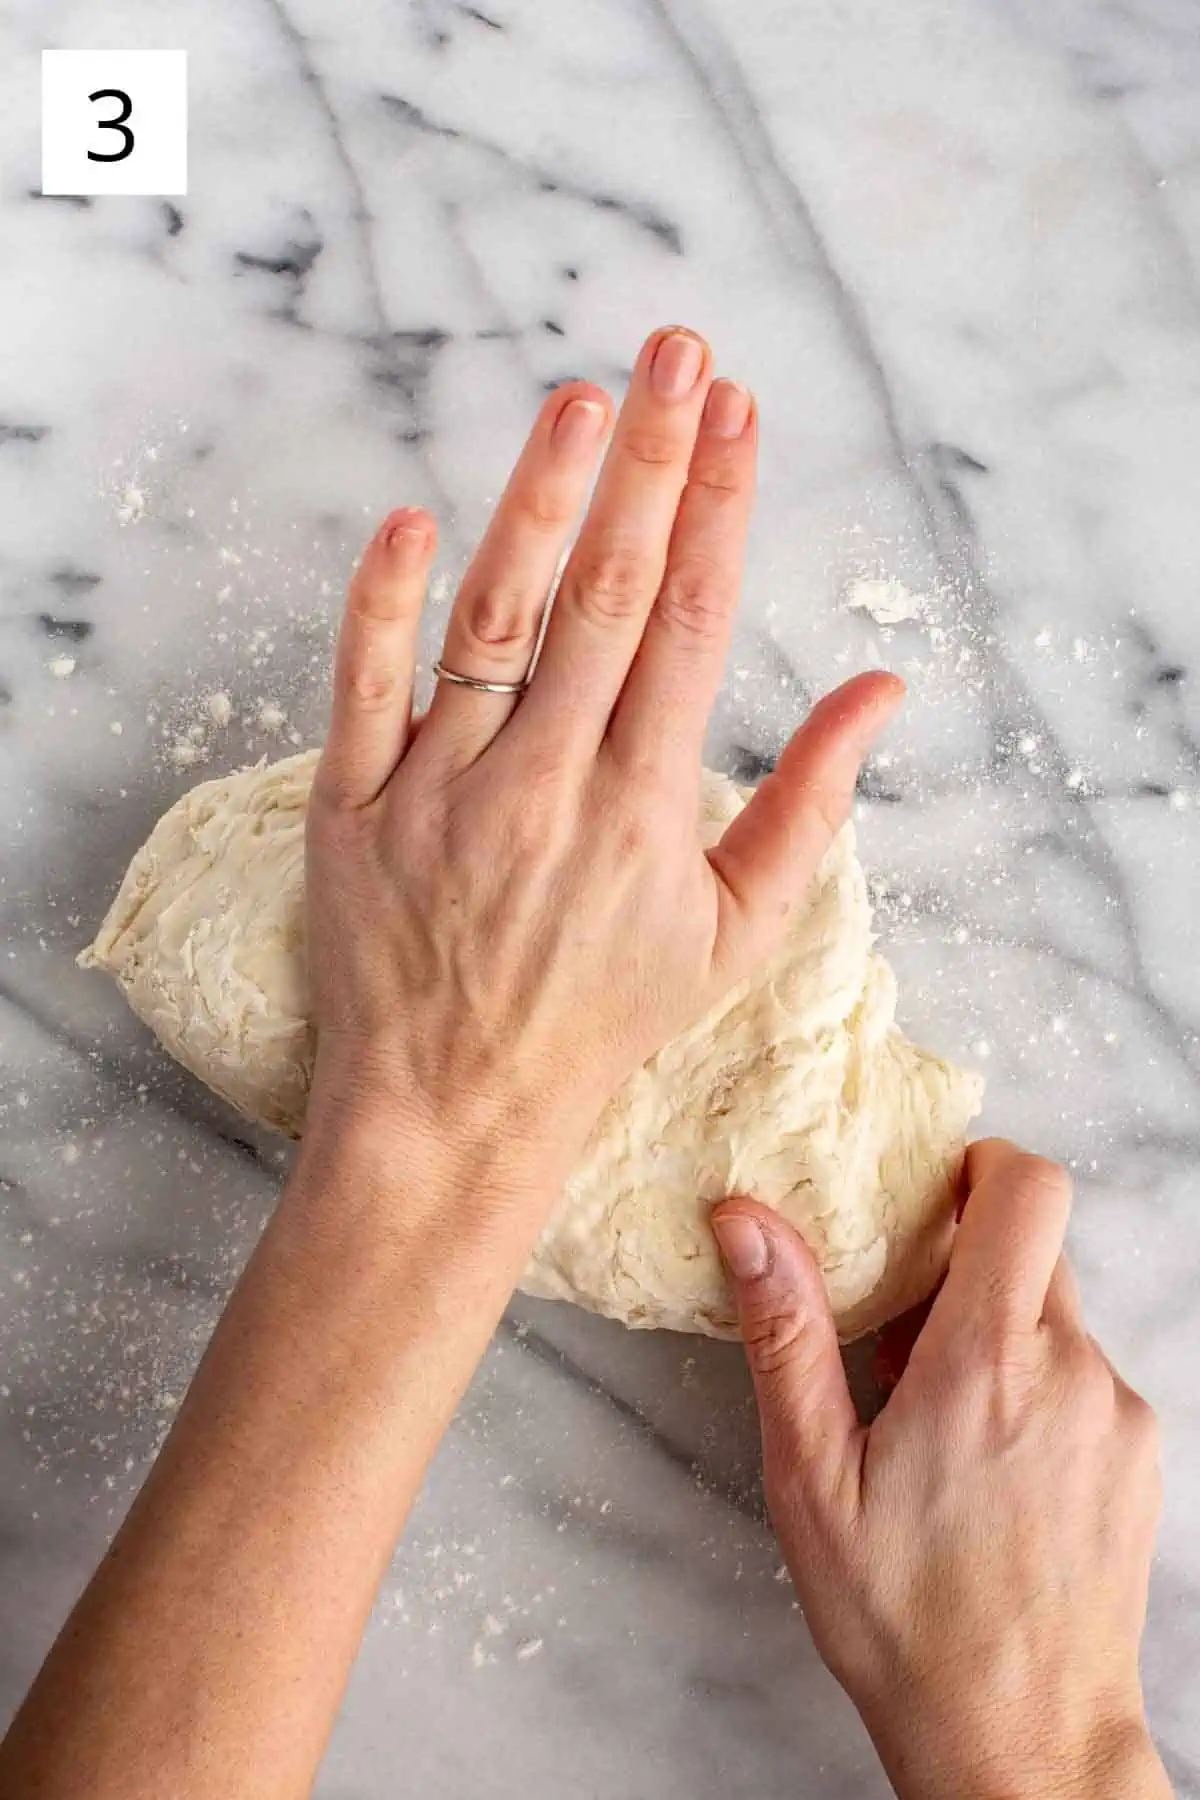 Hands kneading a large ball of pizza dough.